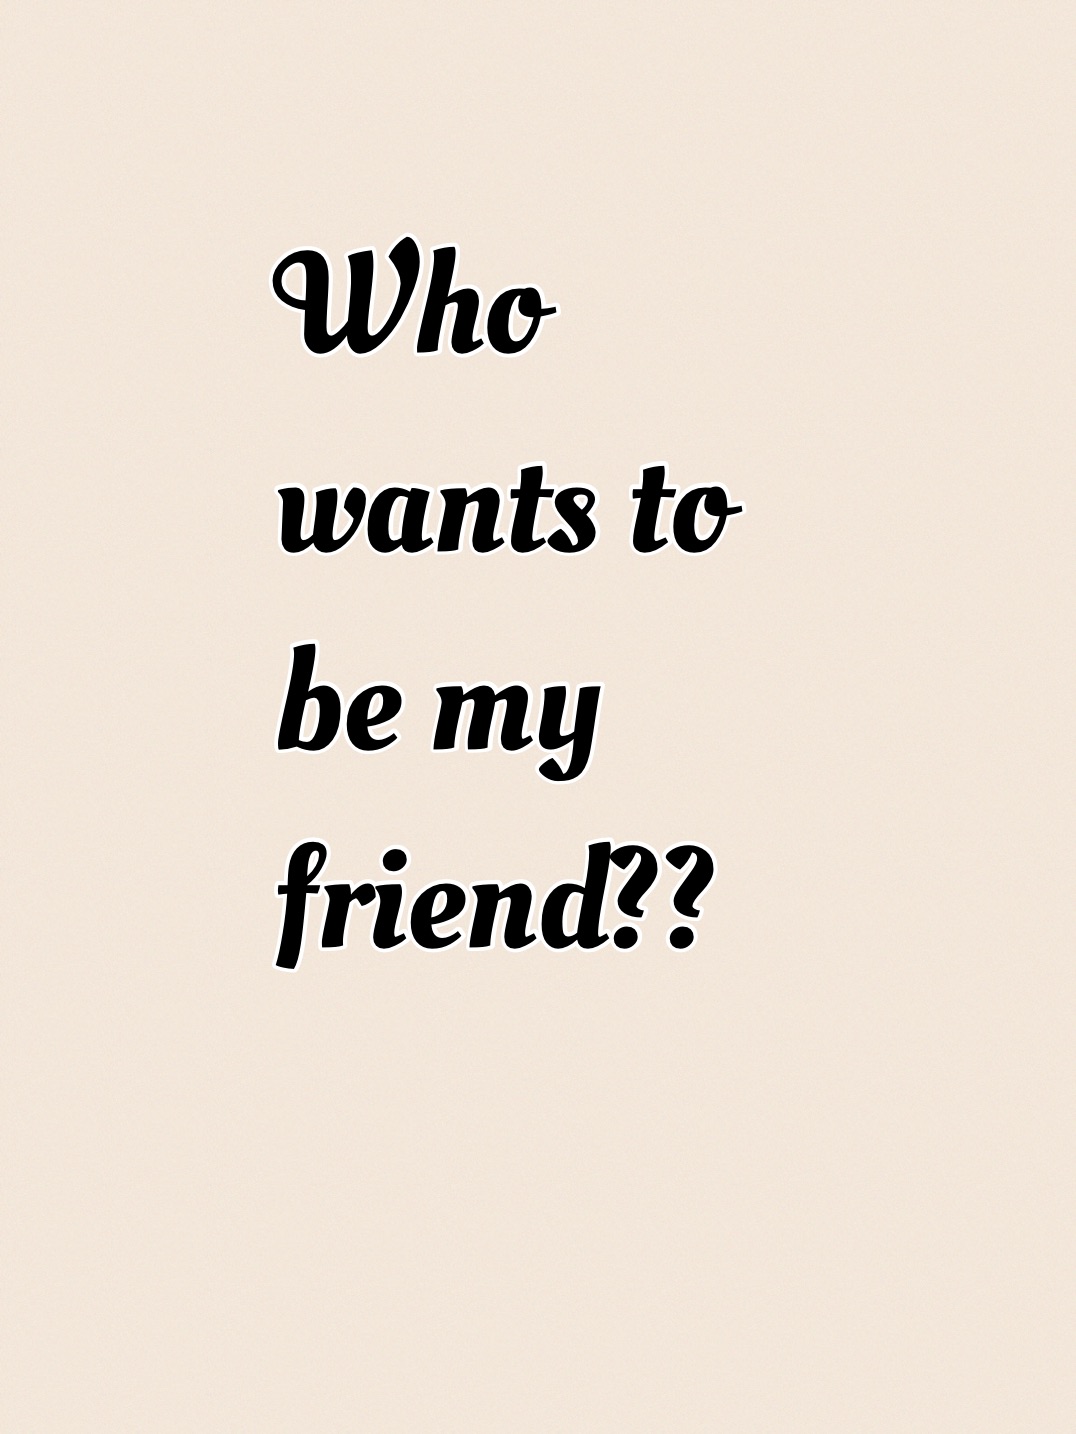 Who wants to be my friend??